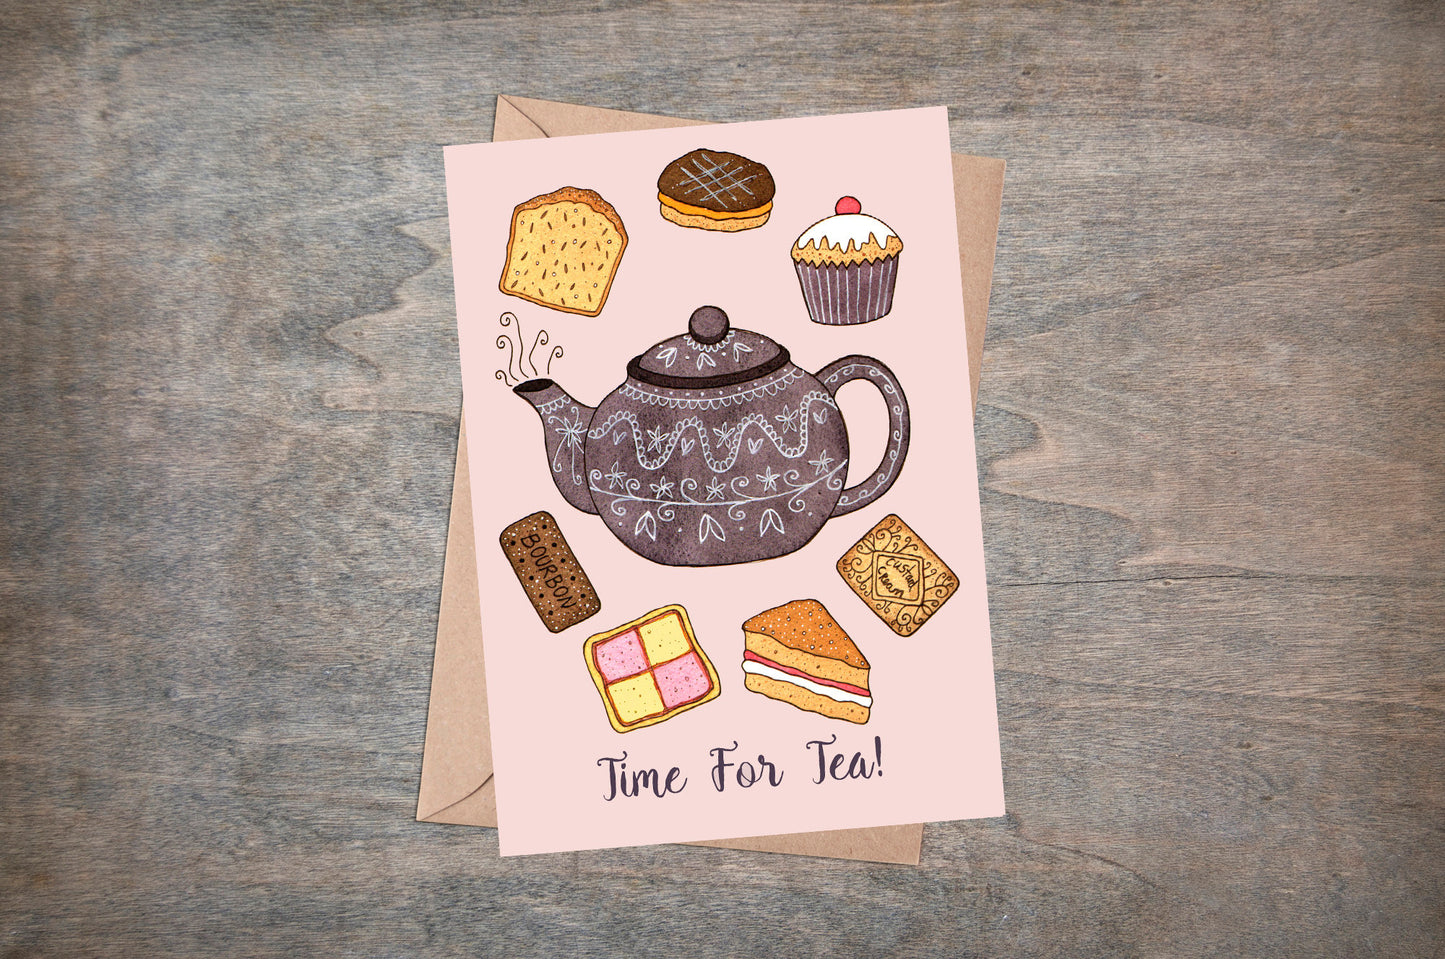 Tea Greetings Card & Envelope - Time For Tea! British High Tea And Cakes - Vintage Teapot Pink Mothers Day Card - Baking Lover Birthday Card